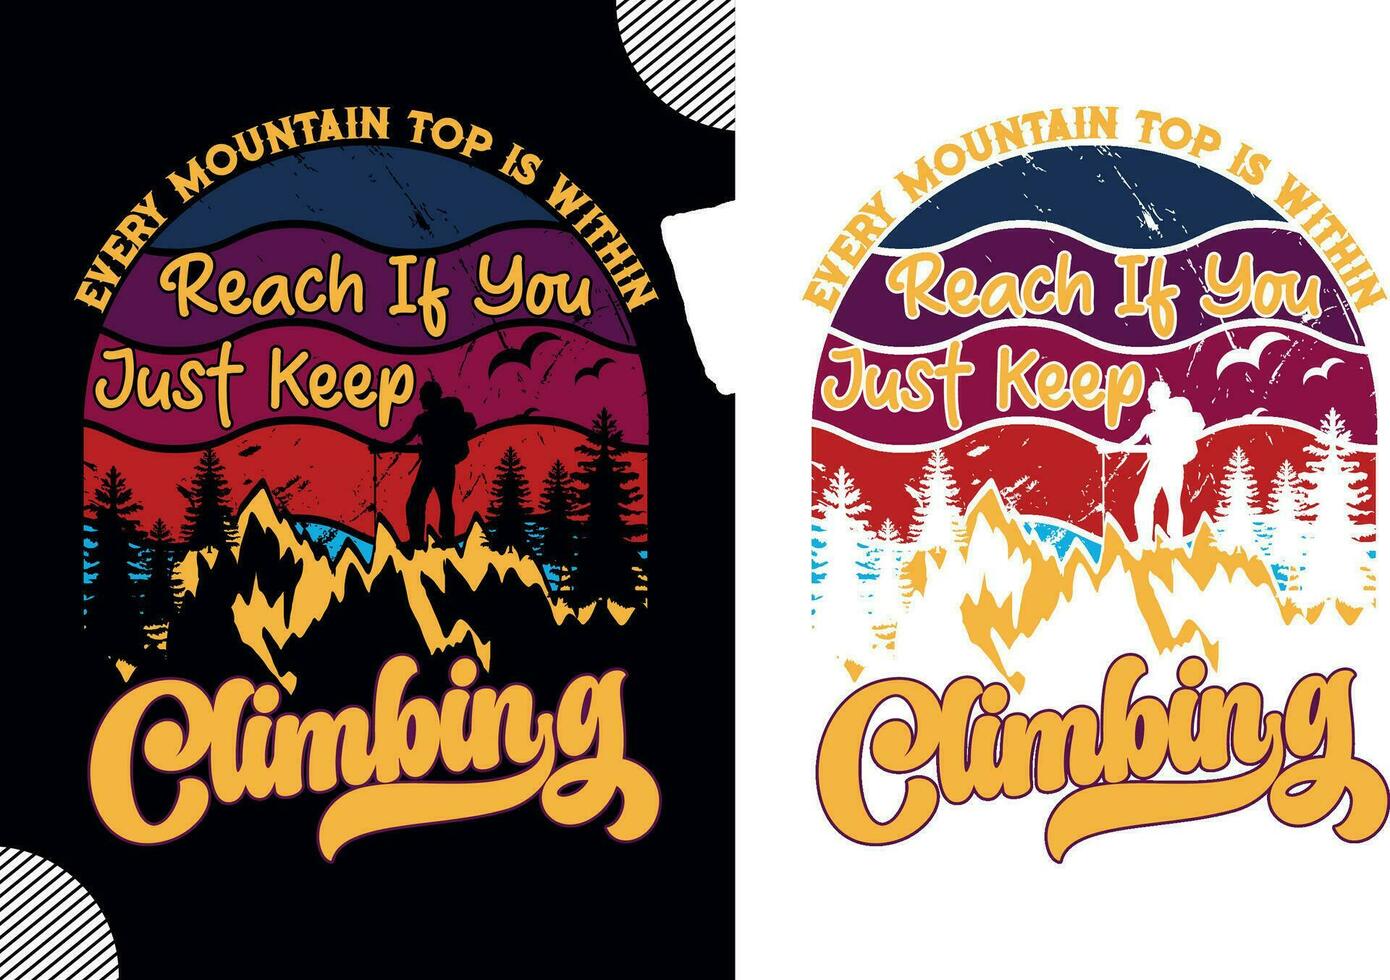 Every mountain top is within reach if you just keep climbing, t shirt design vector